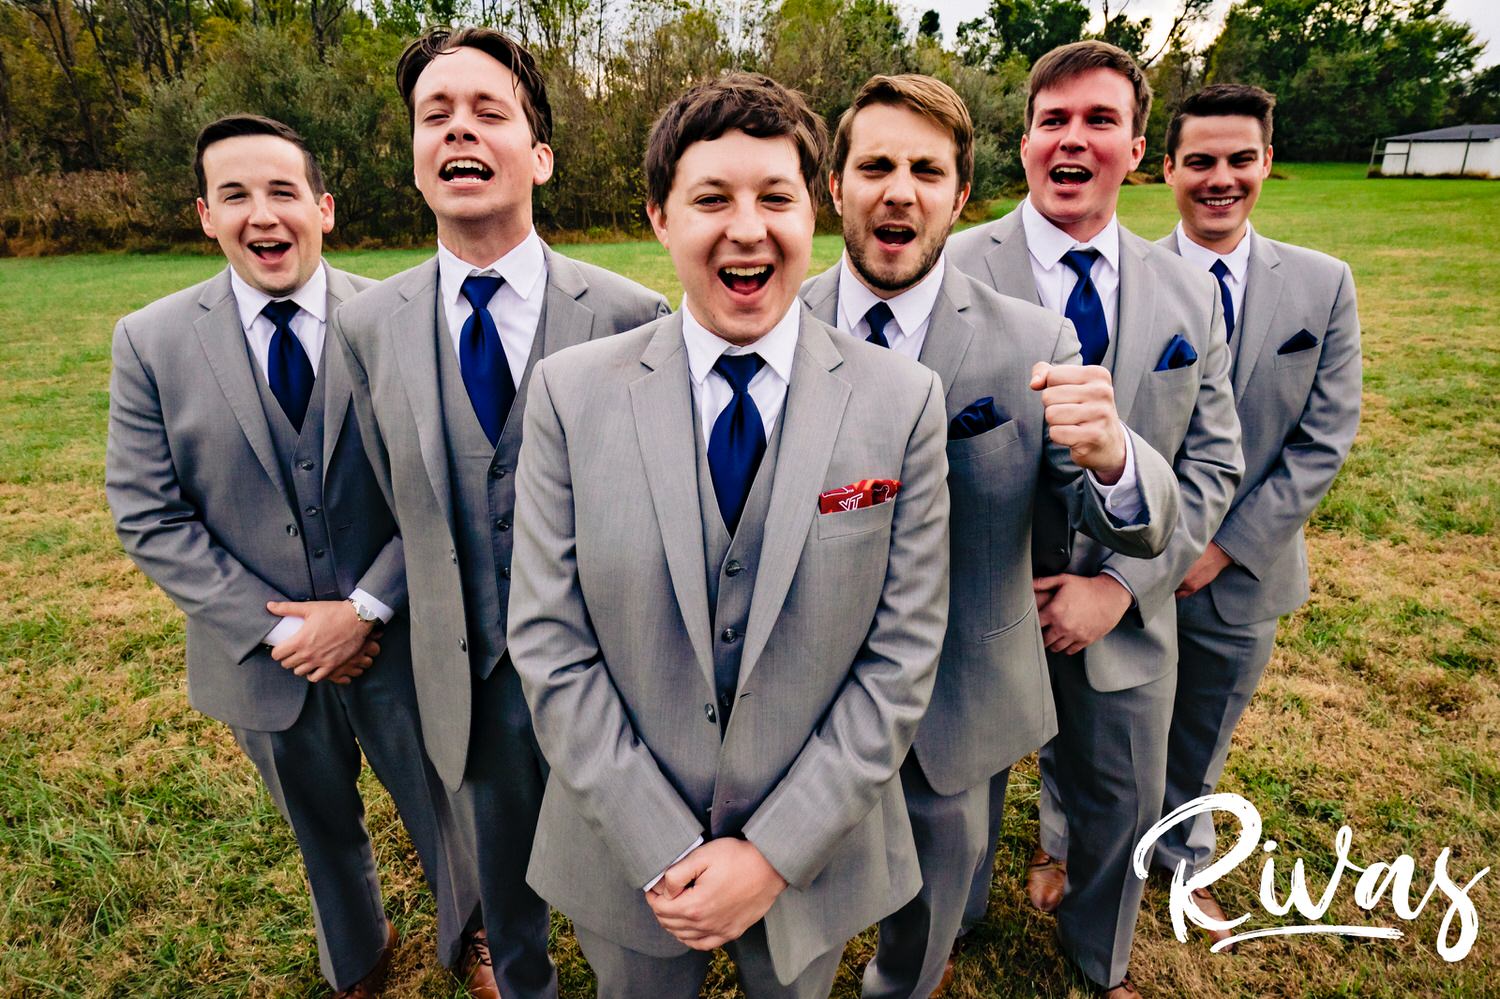 A colorful, candid picture of a groom and his groomsmen standing together laughing on the afternoon of his fall wedding at The Barns at Hamilton Station Vineyard. 